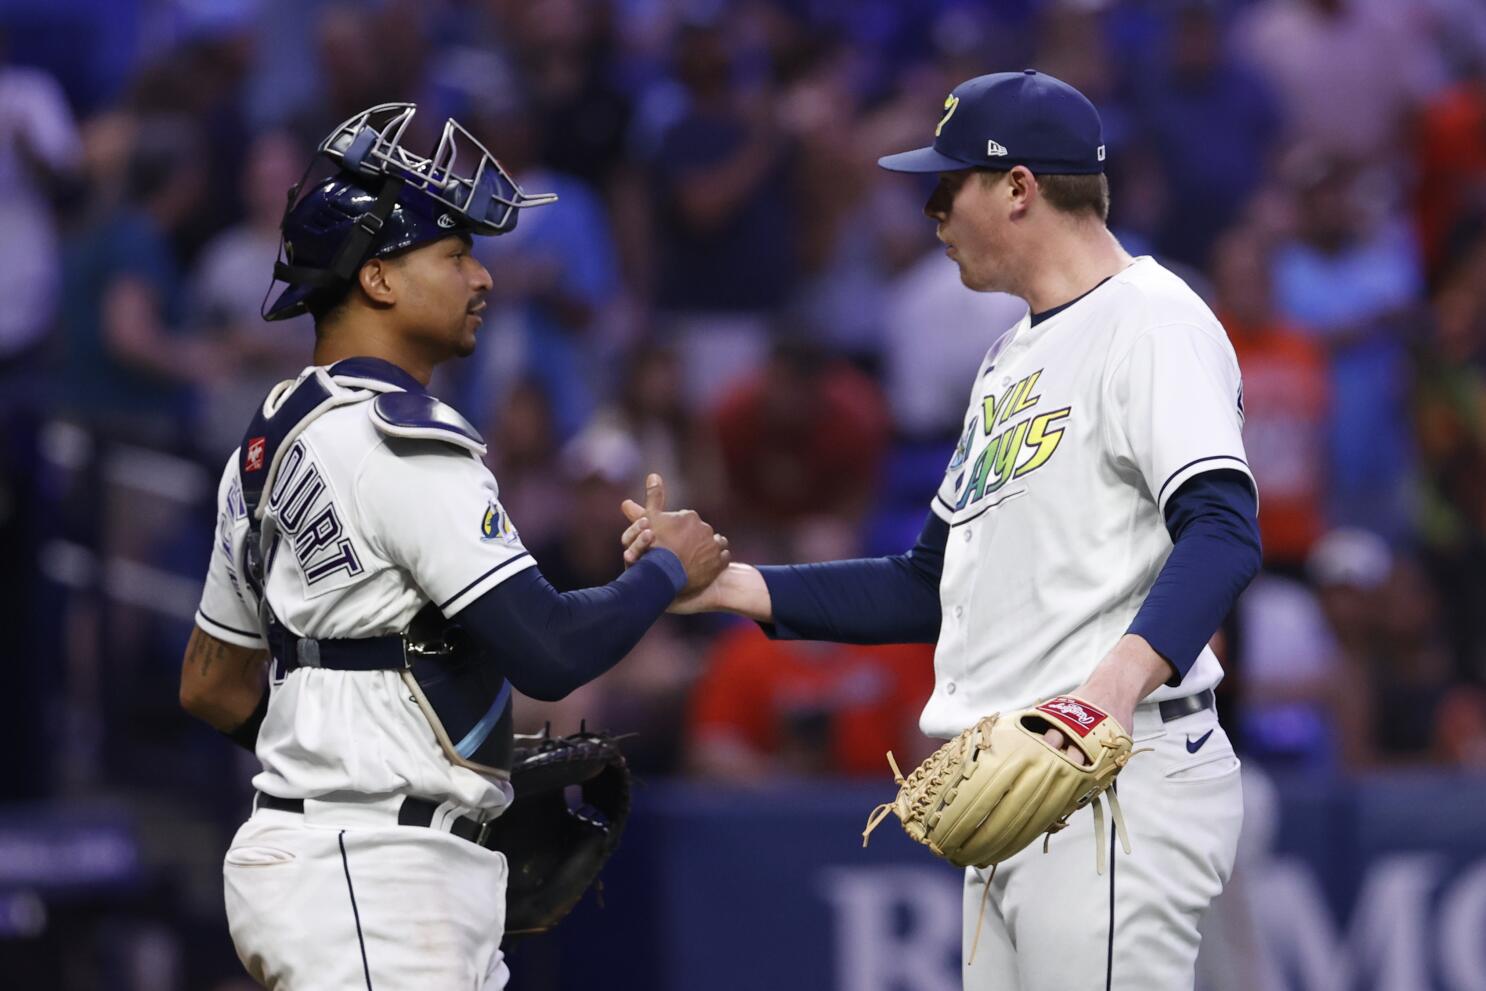 Contreras, Cubs keep rallying, edge Brewers 6-5 in 11th